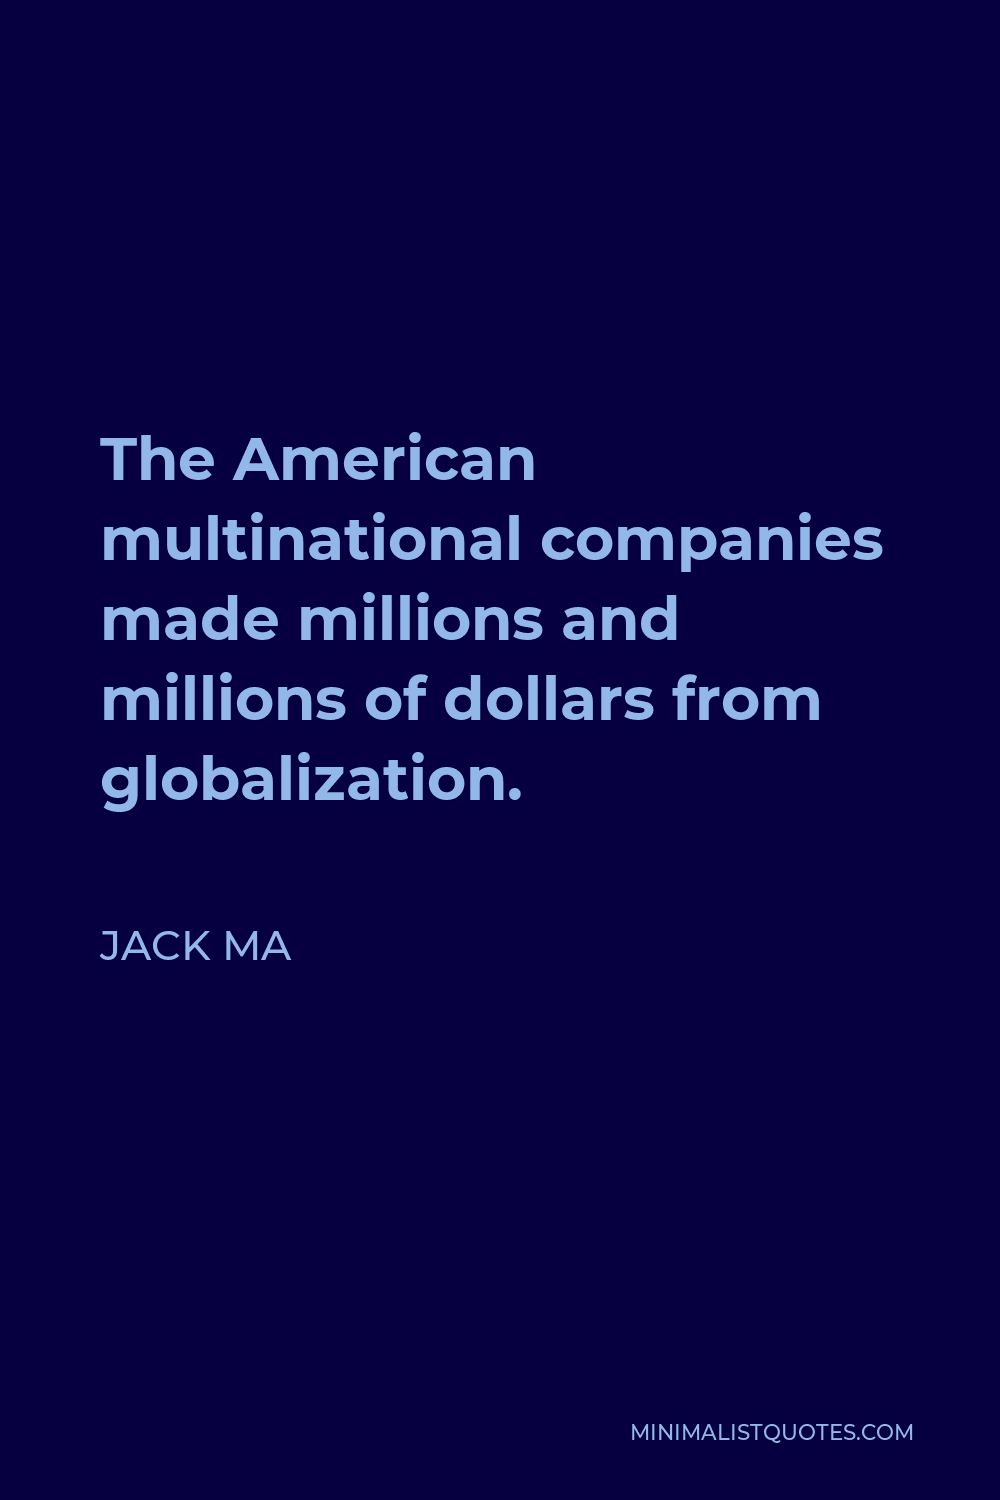 Jack Ma Quote - The American multinational companies made millions and millions of dollars from globalization.